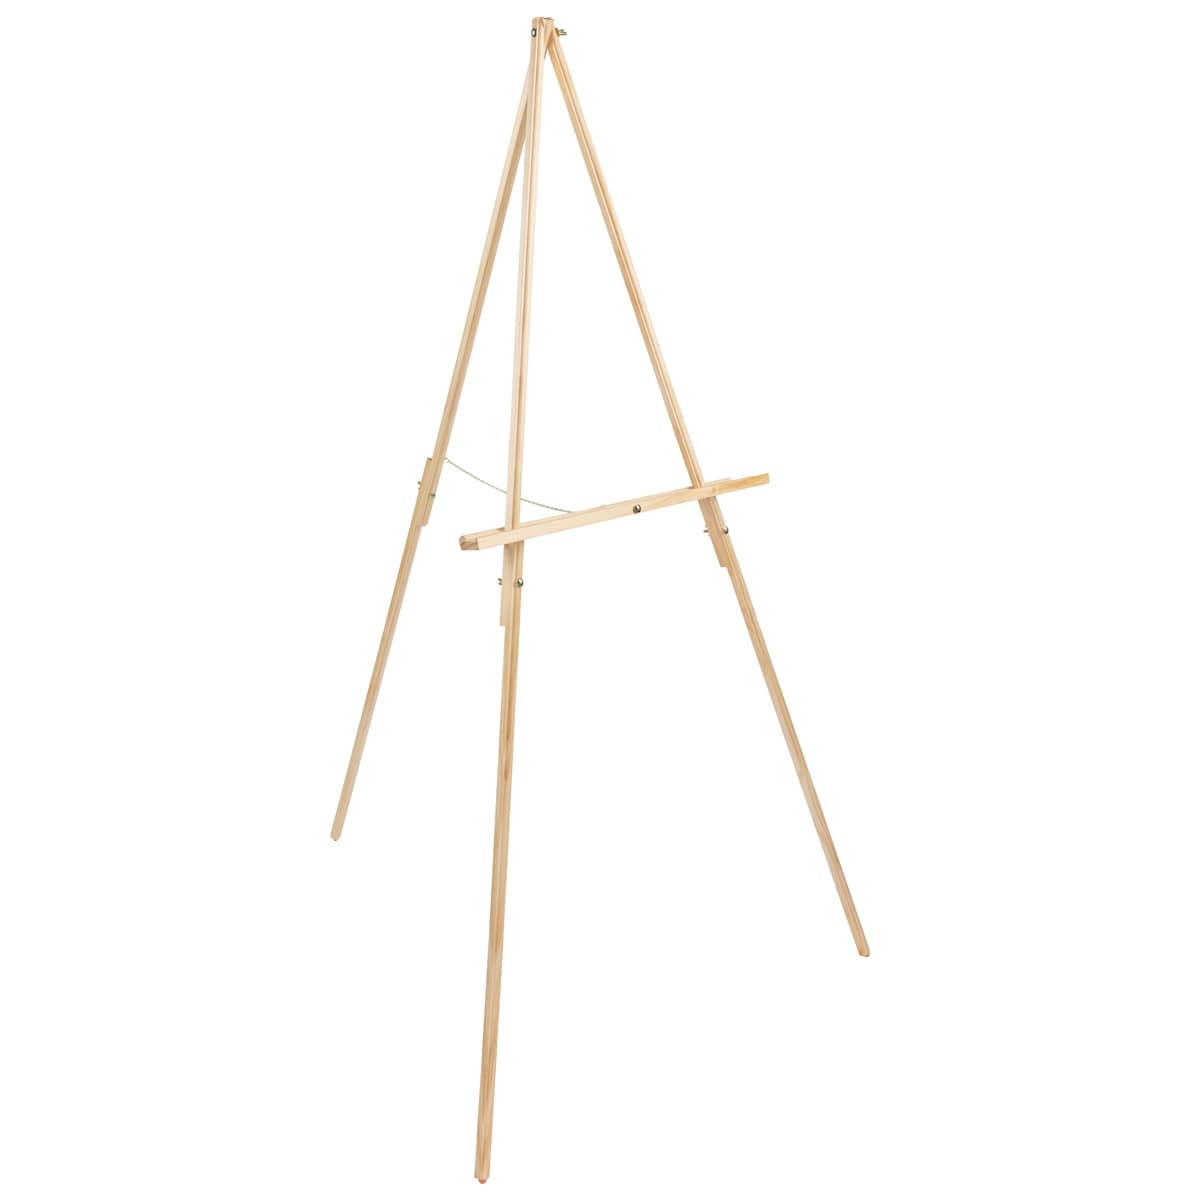 Thrifty Art and Display Easel Beech Finish 30264